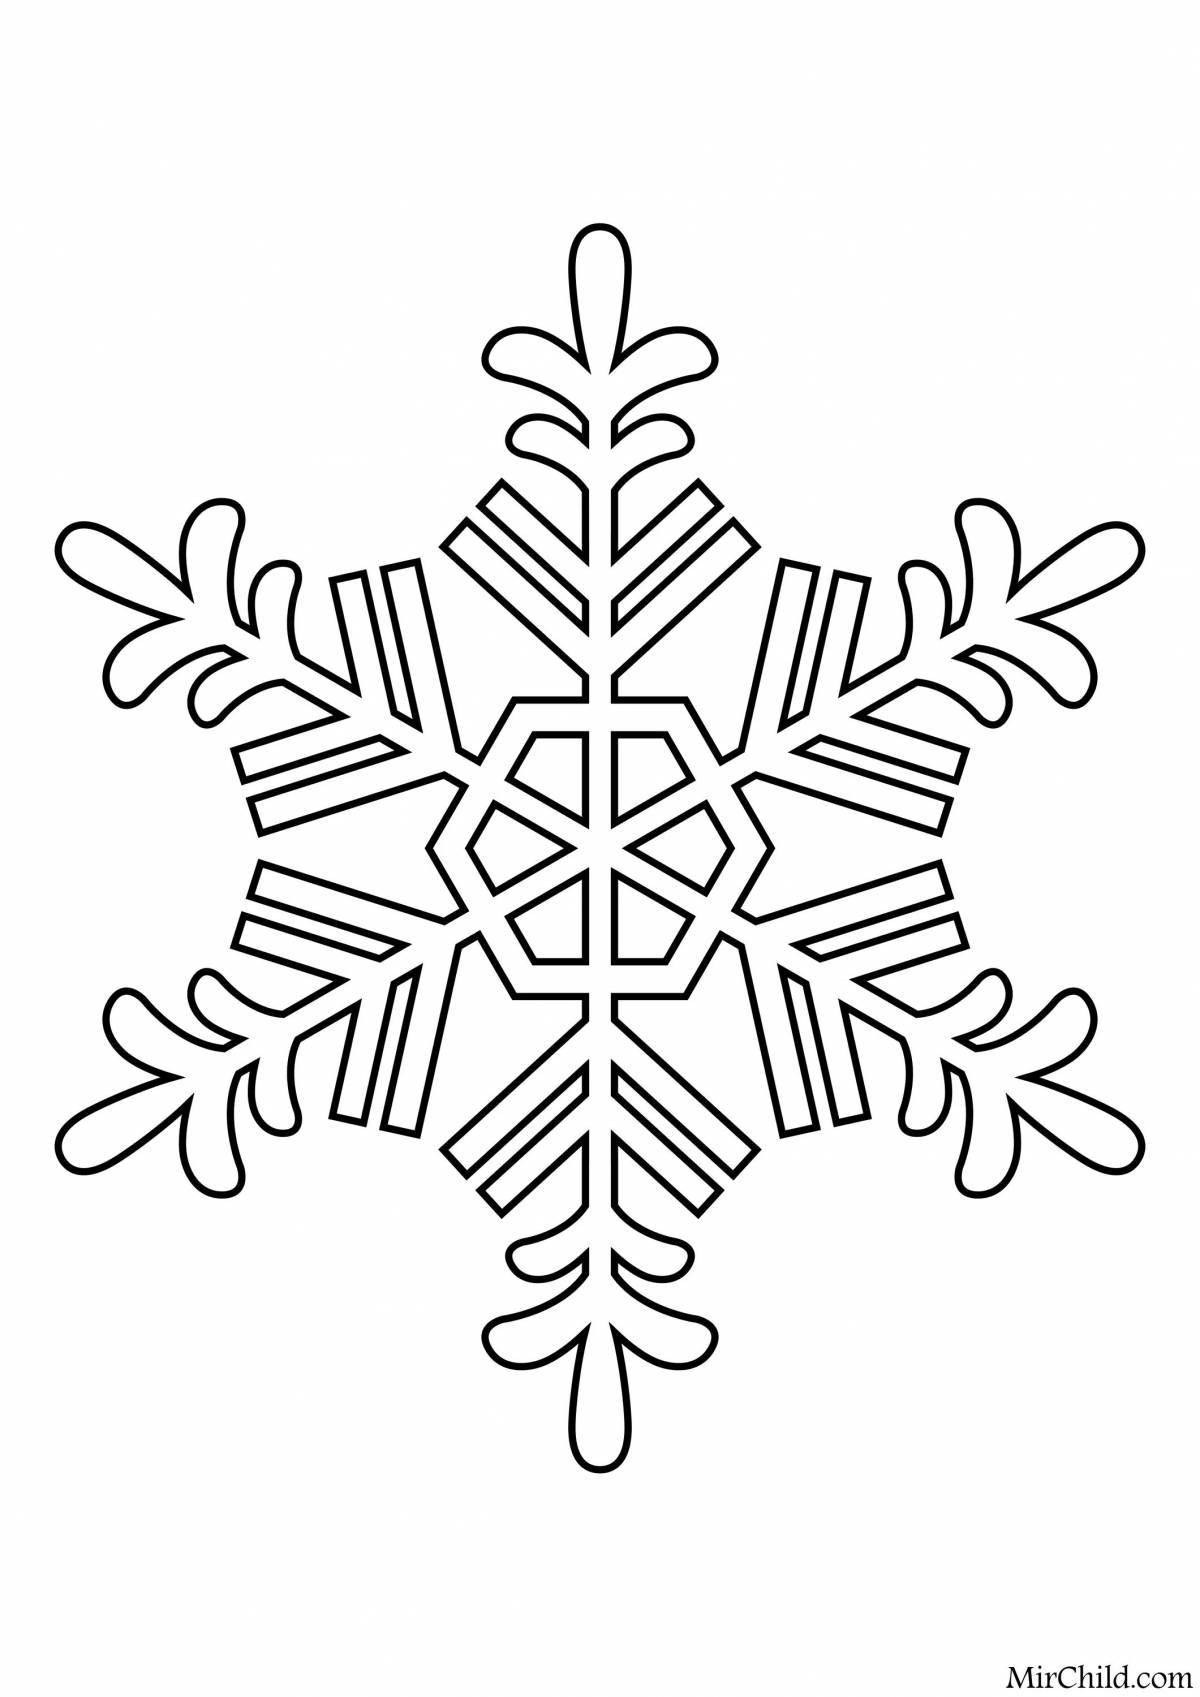 Awesome snowflake Christmas coloring book